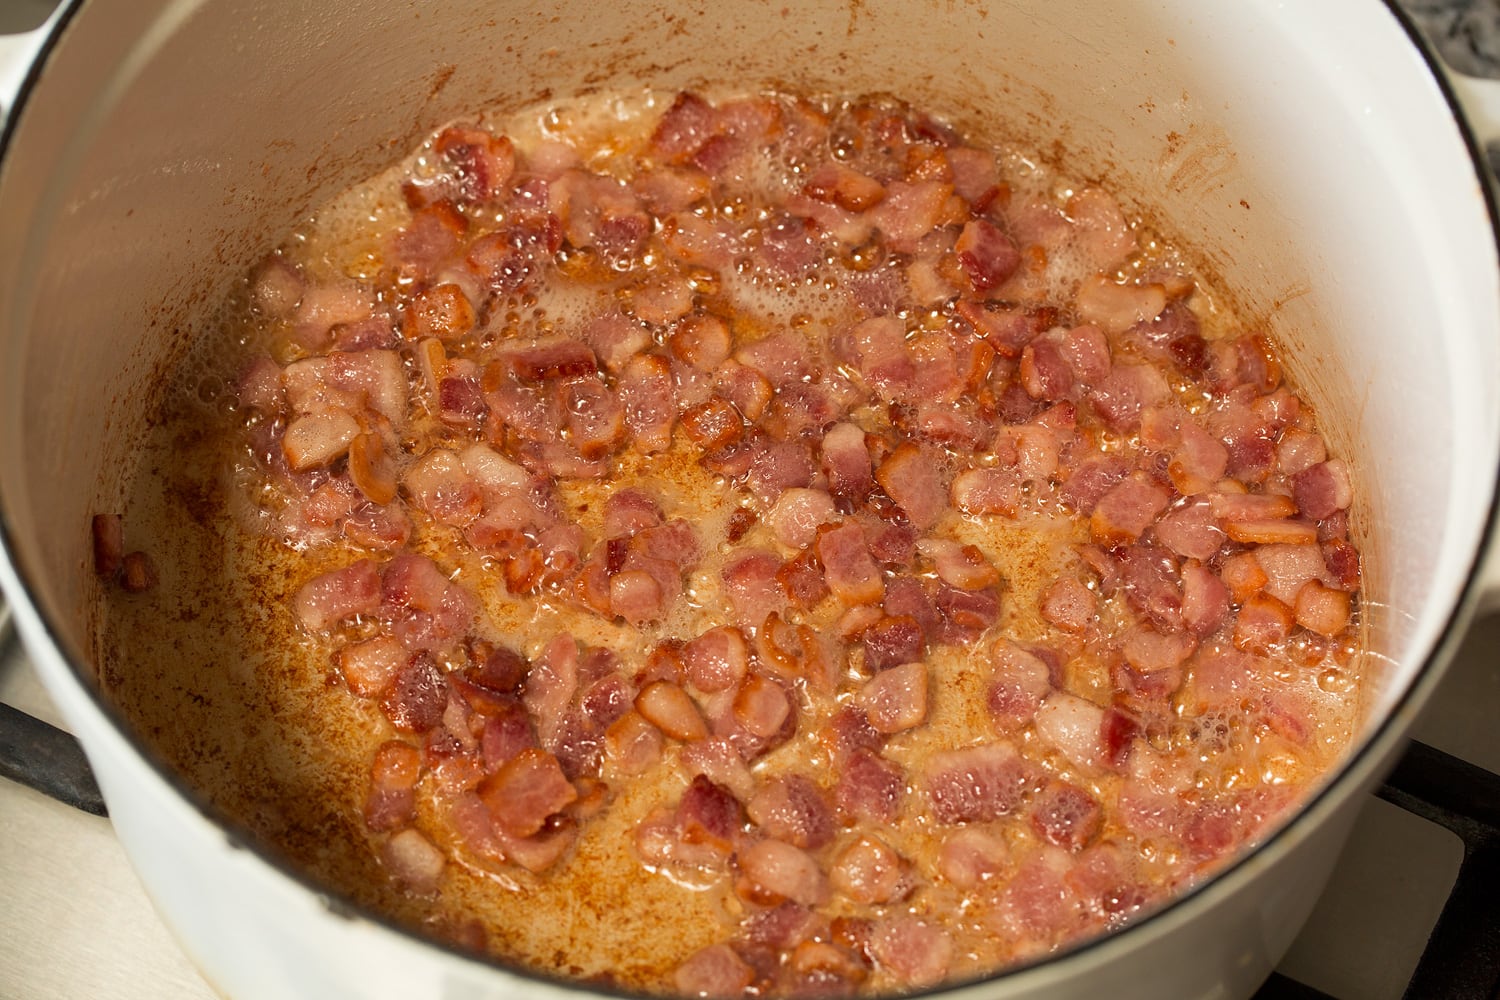 Bacon after cooking in pot.